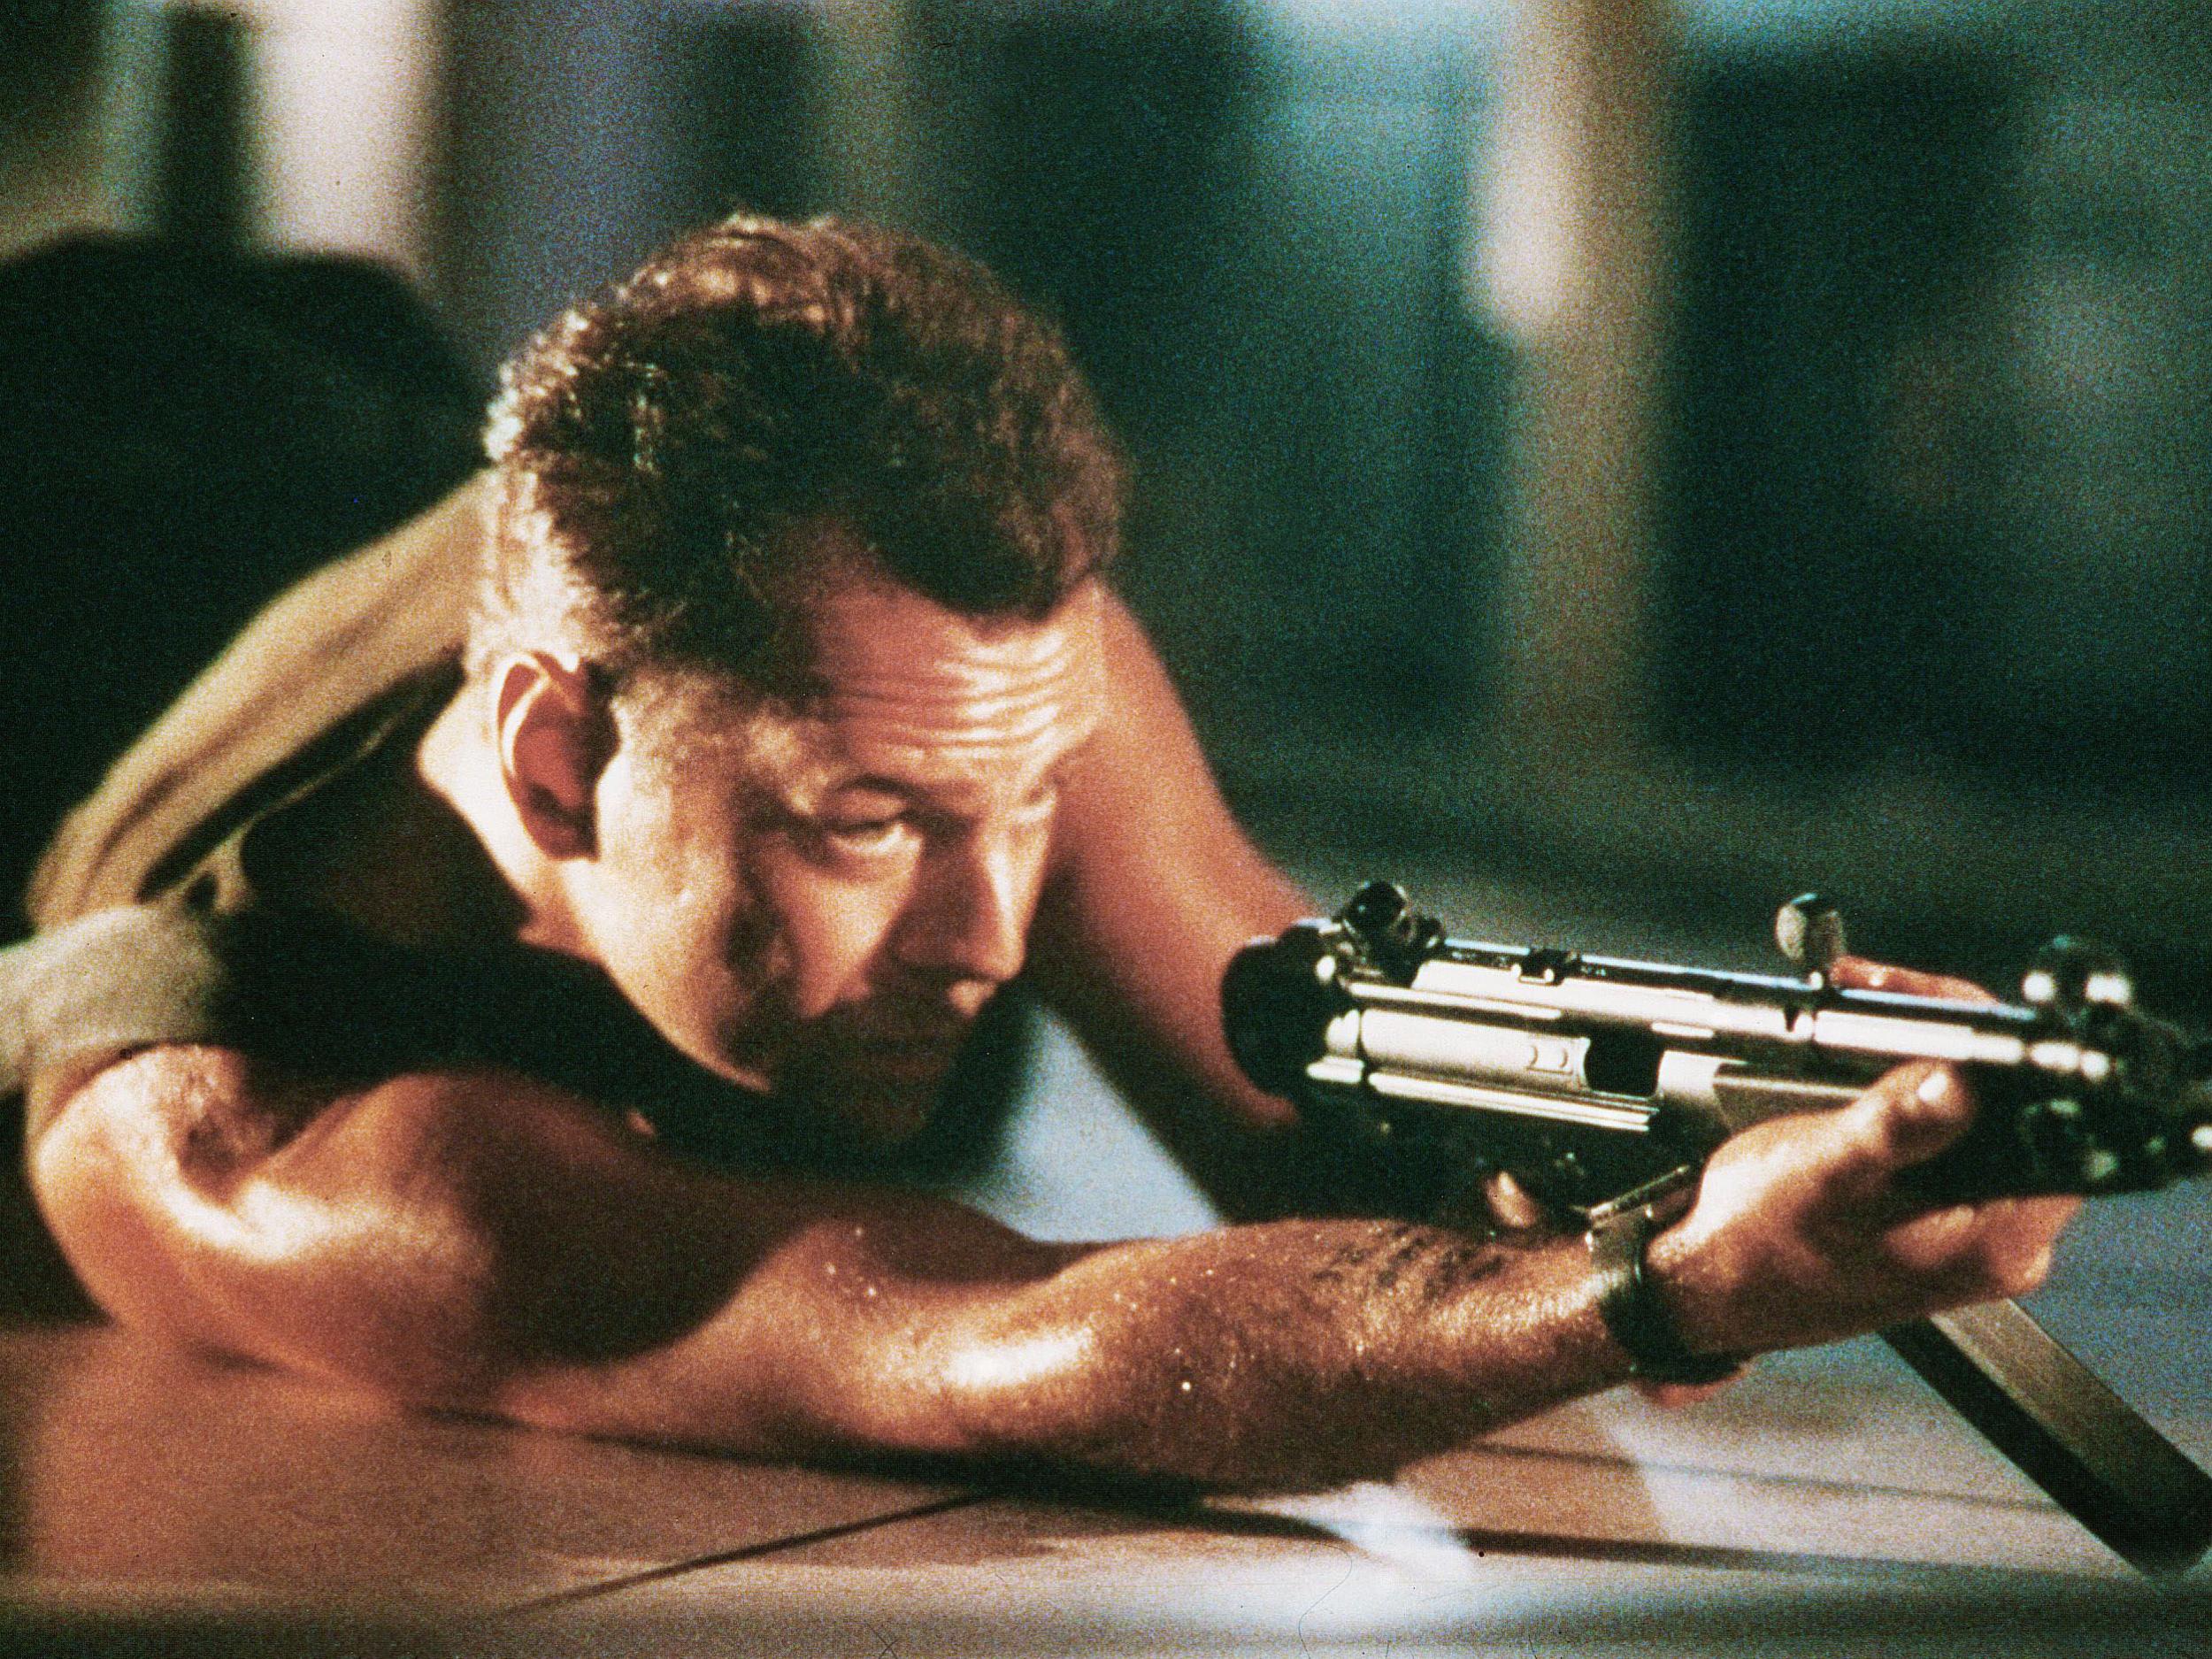 How Die Hard set the stage for 25 years of action films